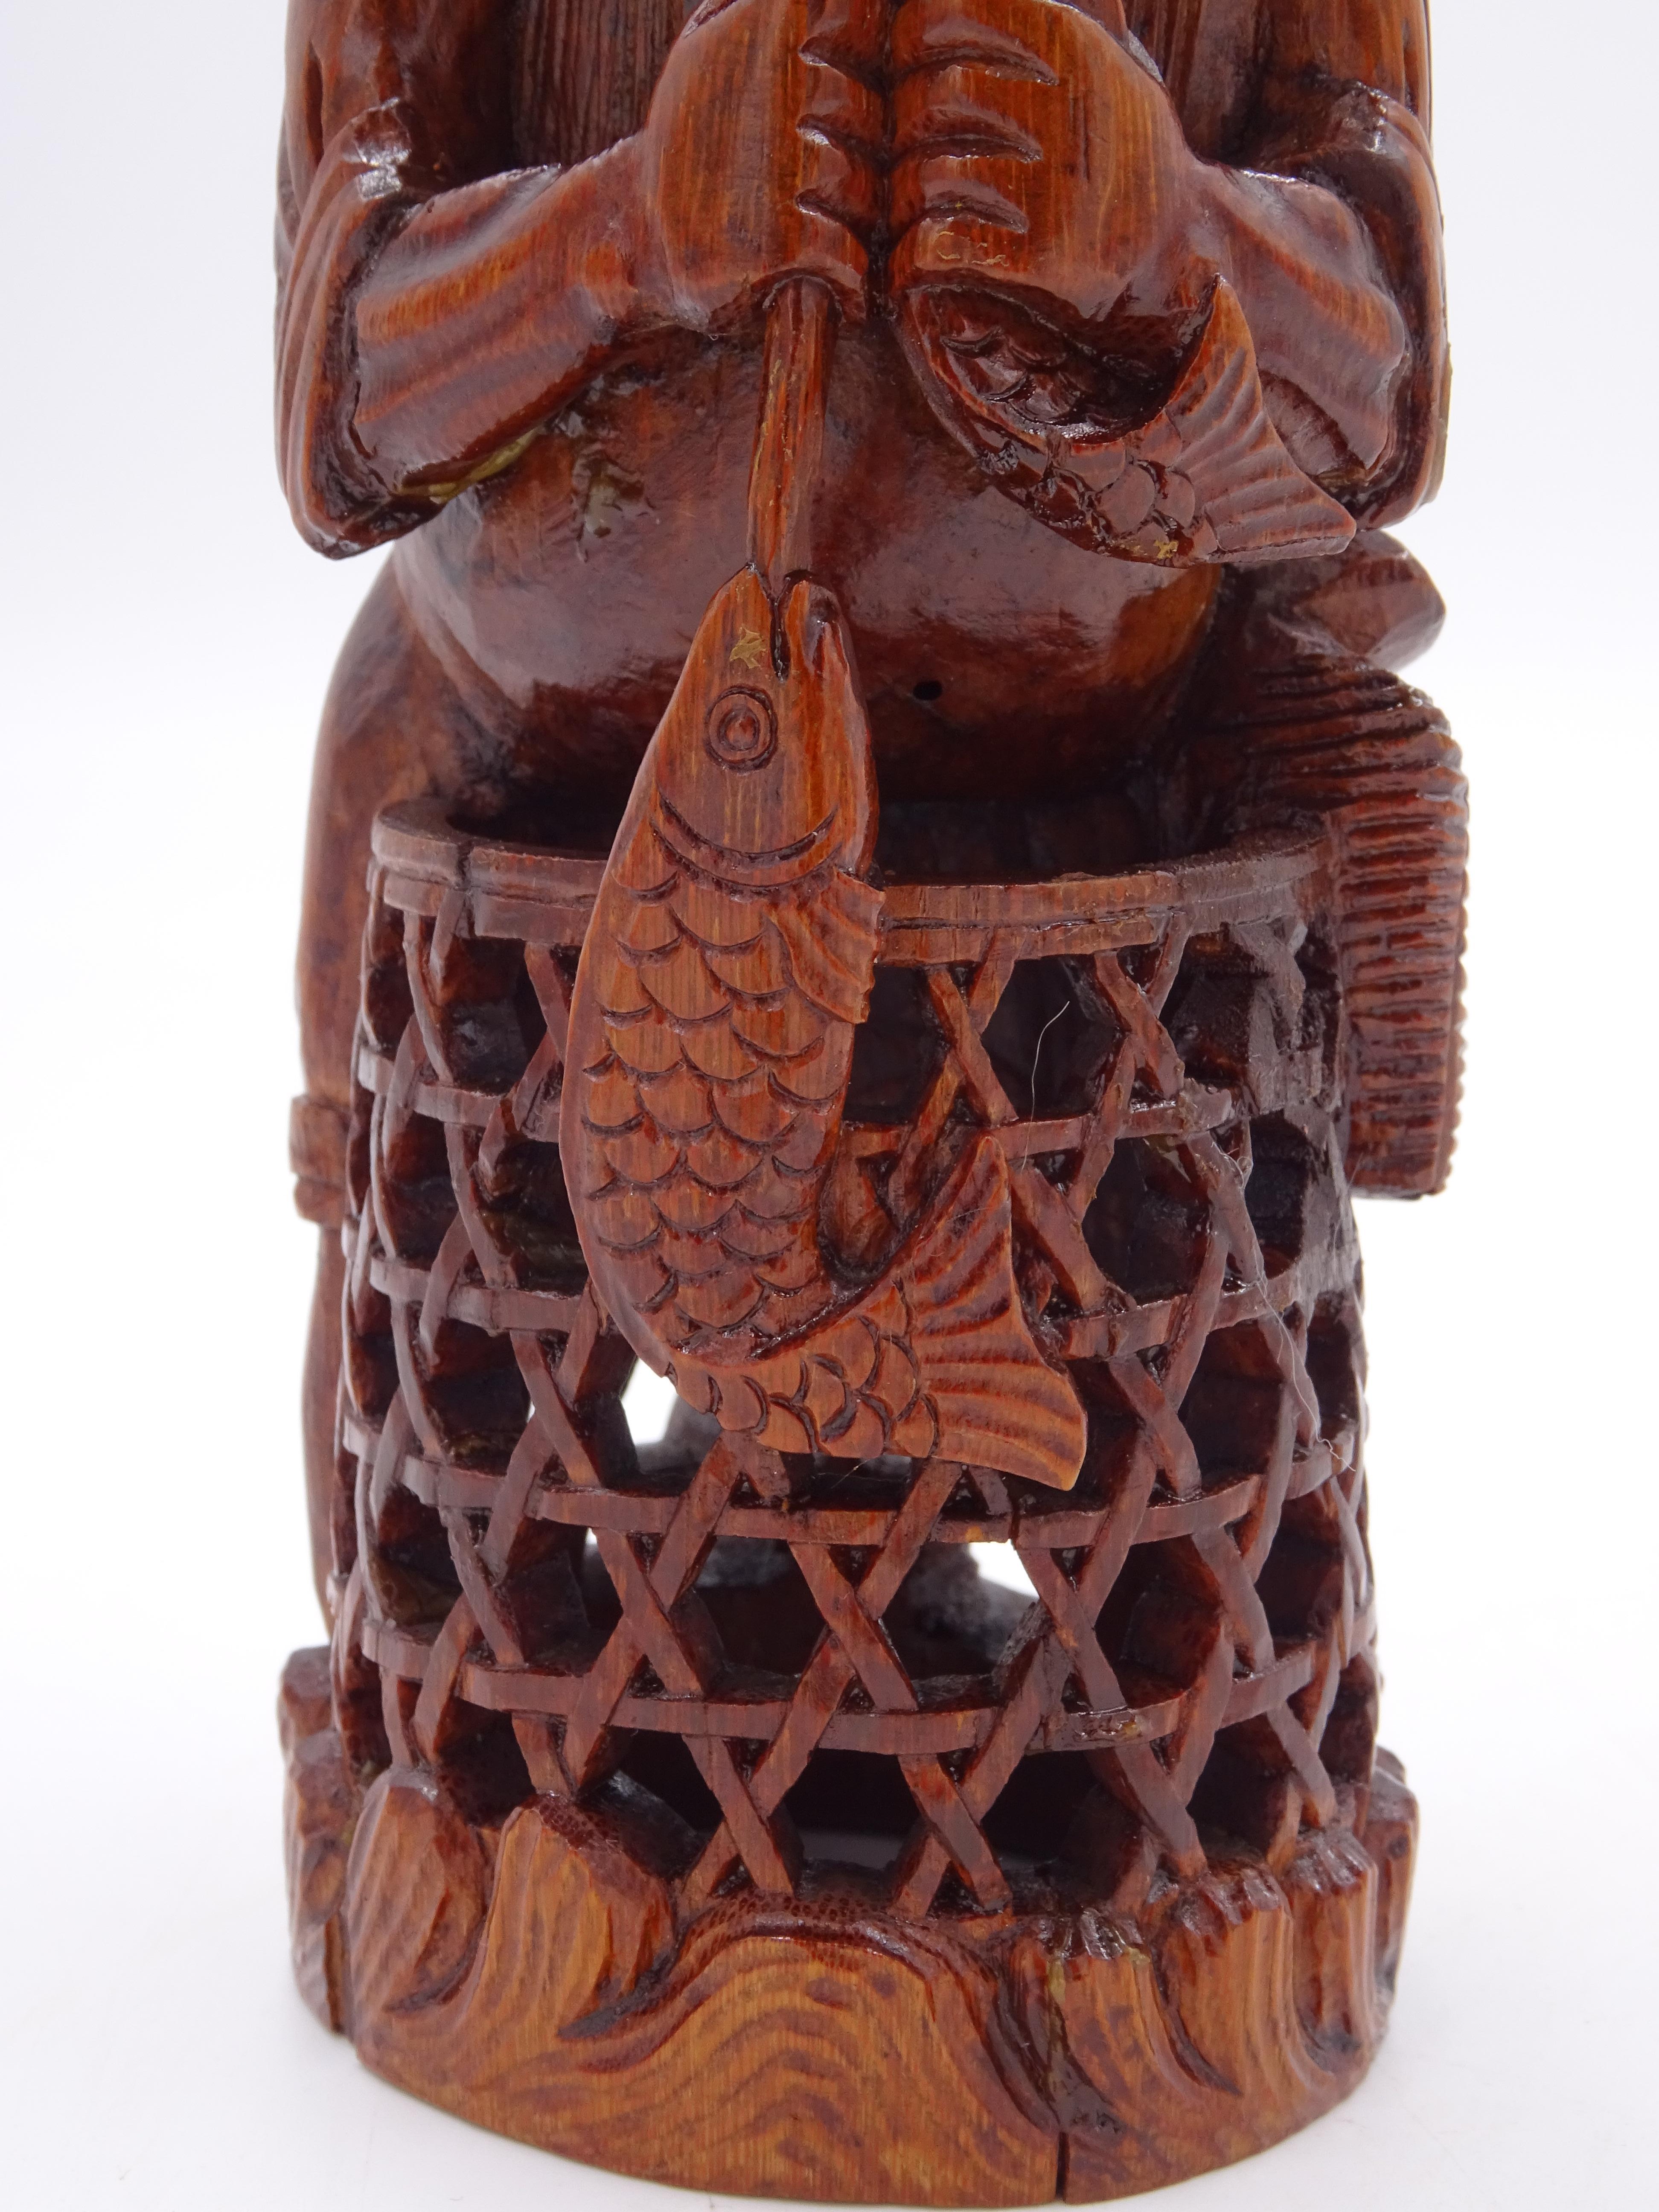 Bamboo wood sculpture depicting a fisherman with oriental features, with a long beard and wearing a headdress, while holding two fish in his hand.

The lower part is embellished with an elaborate carved fishing net. 
The work is of Chinese